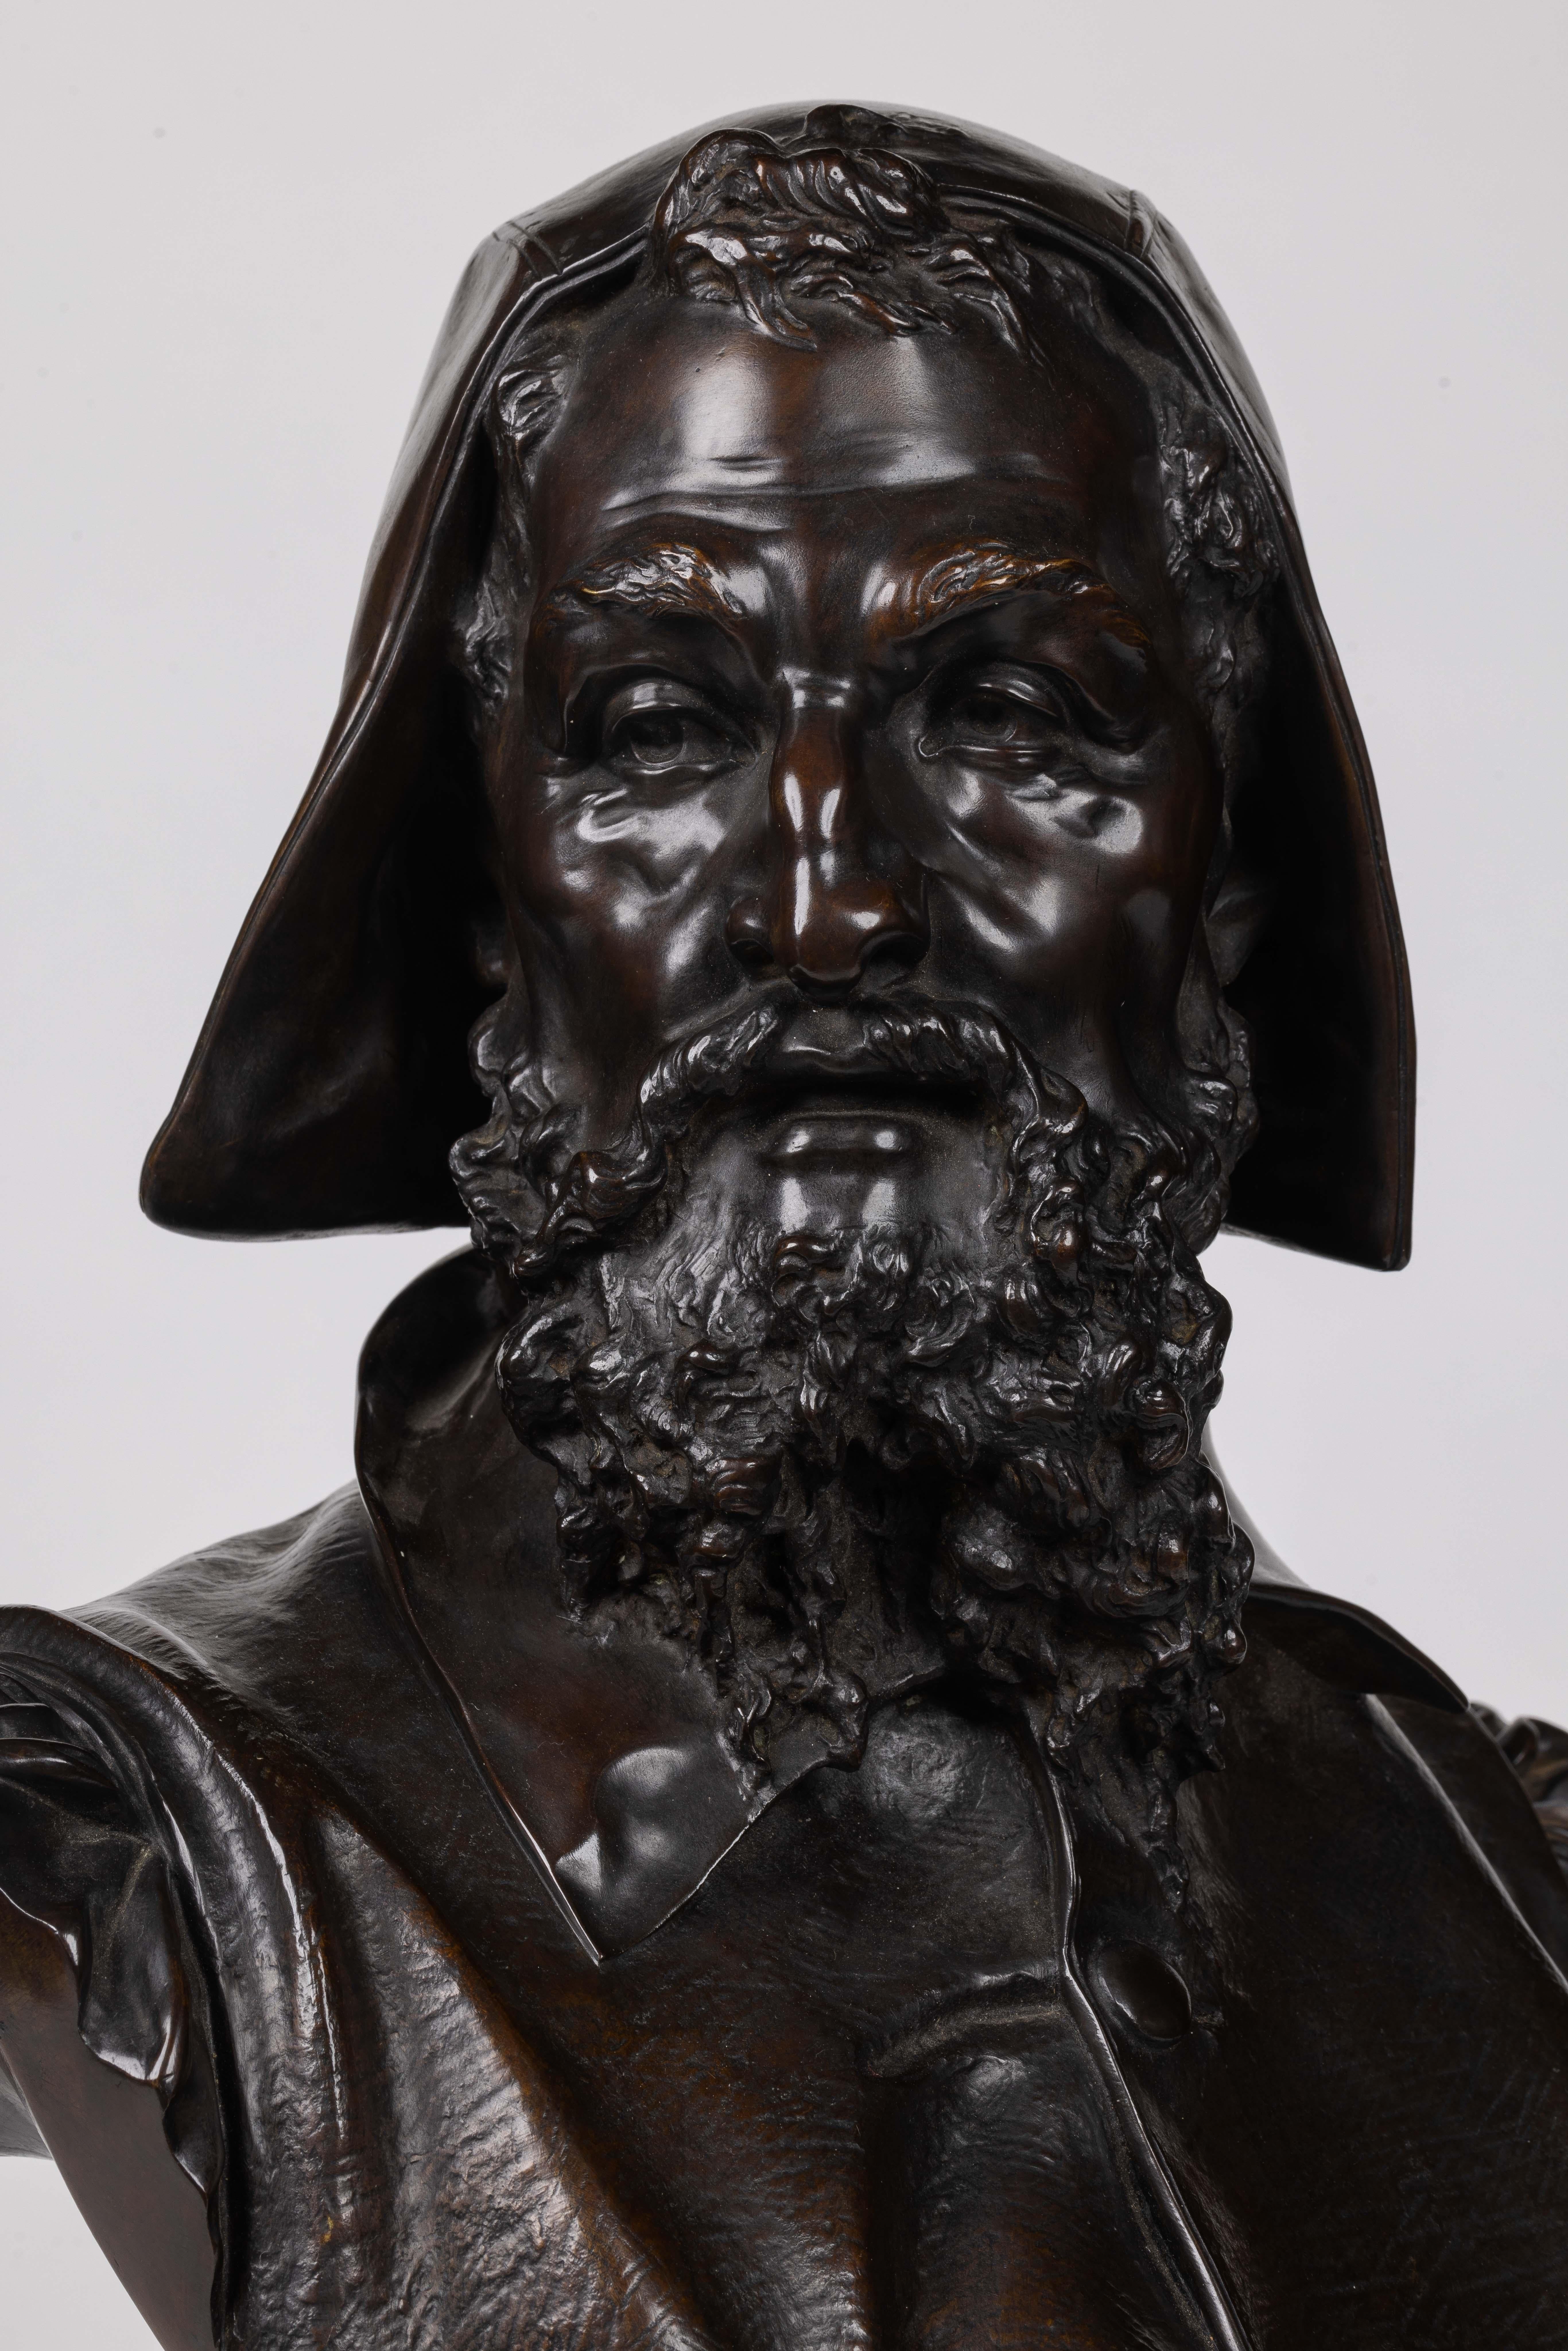 Albert-Ernest Carrier-Belleuse, A Rare and Important Bronze Bust of Michelangelo For Sale 2